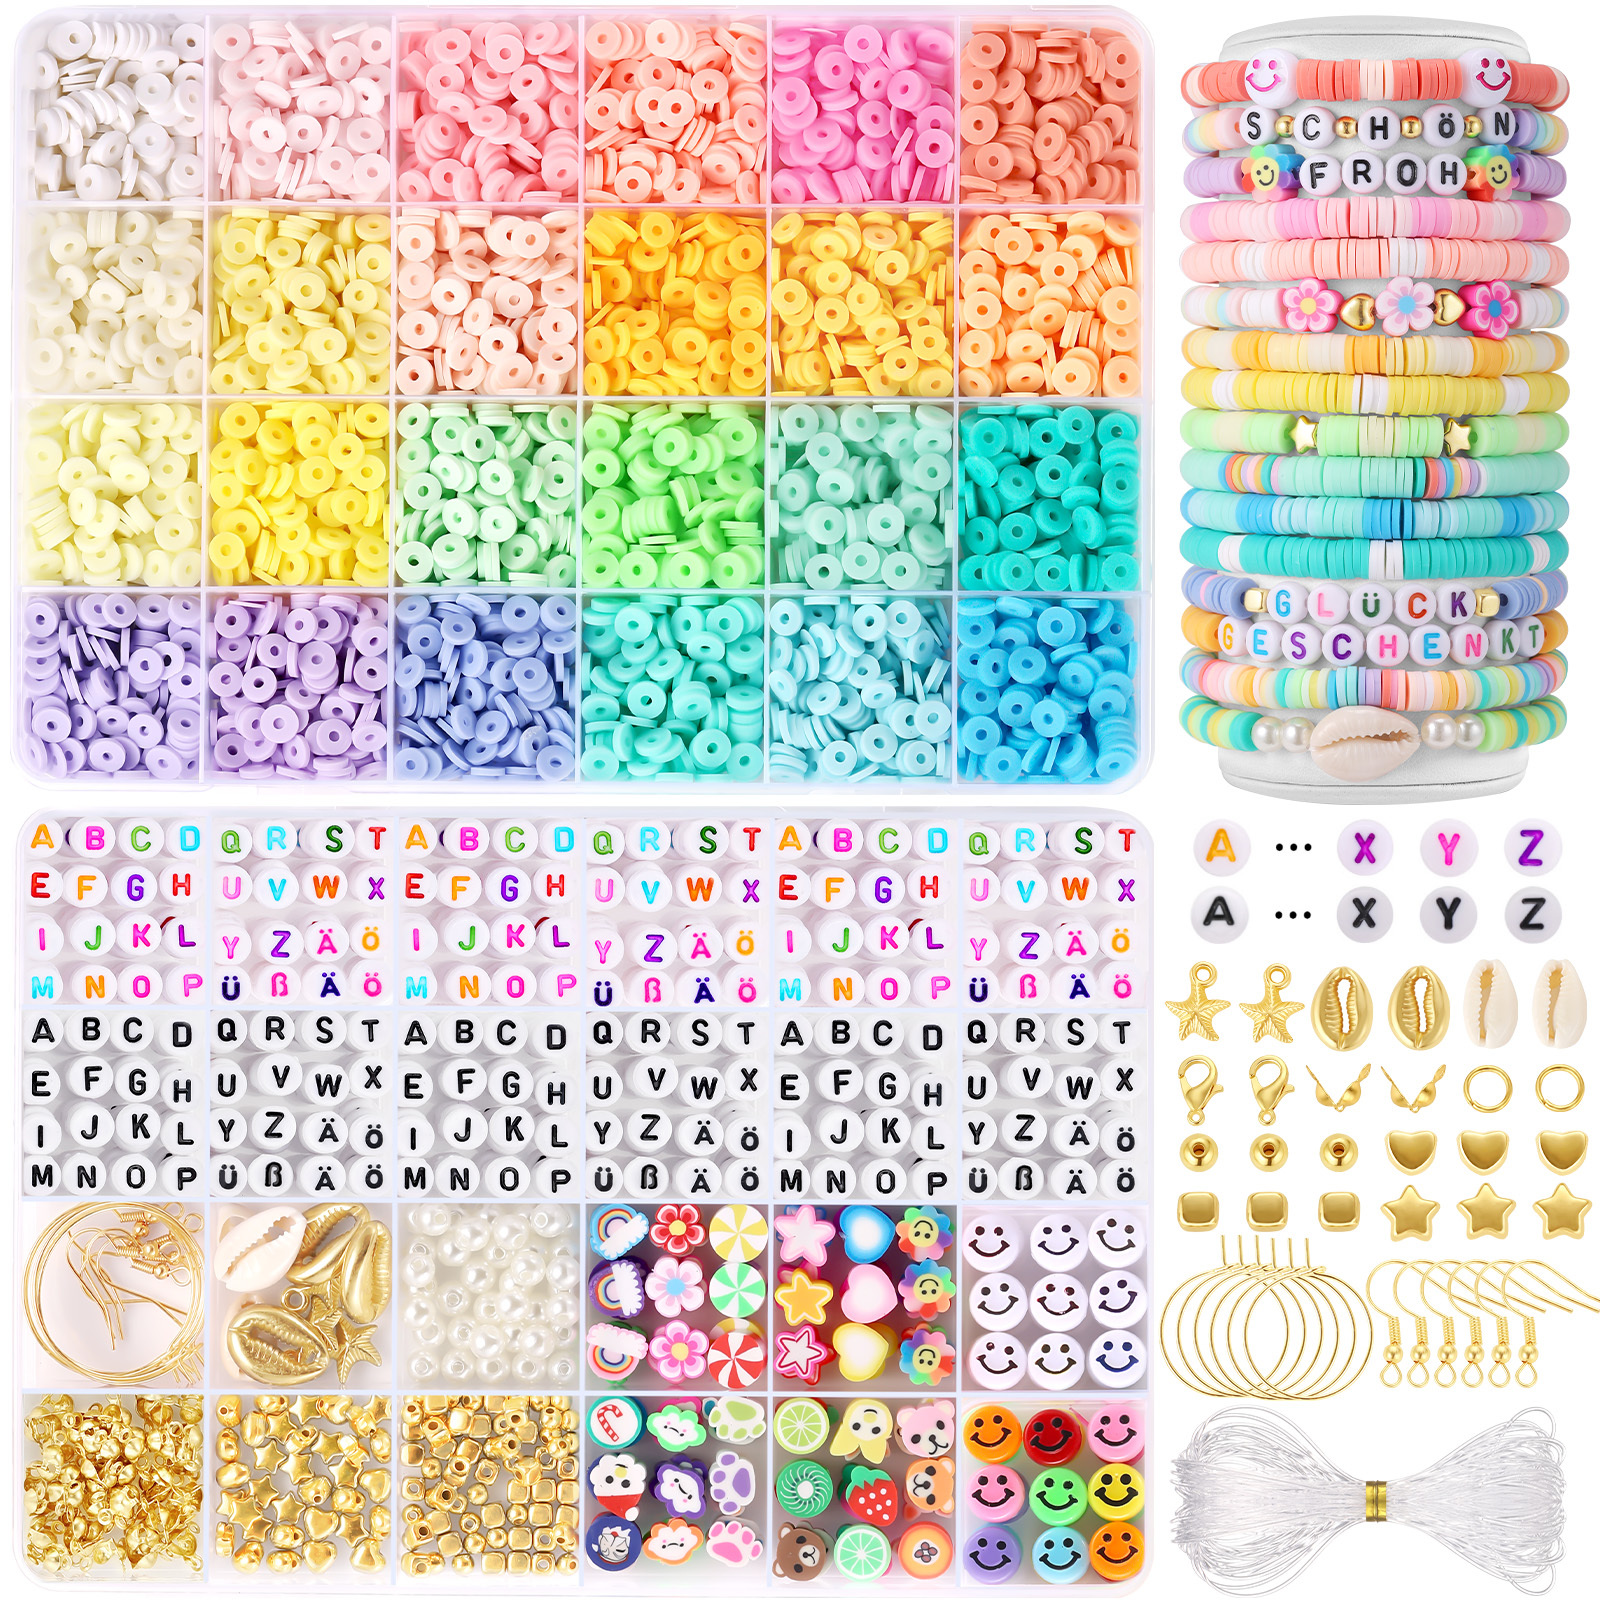 Funtopia Clay Beads for Jewelry Making, Flat Round Disc Bracelet Making  Kit, Friendship Bracelets Kit with Elastic Strings for Necklace Earring,  DIY Crafts Kit for Girls Ages 8-12, Gift for Teen Girls 